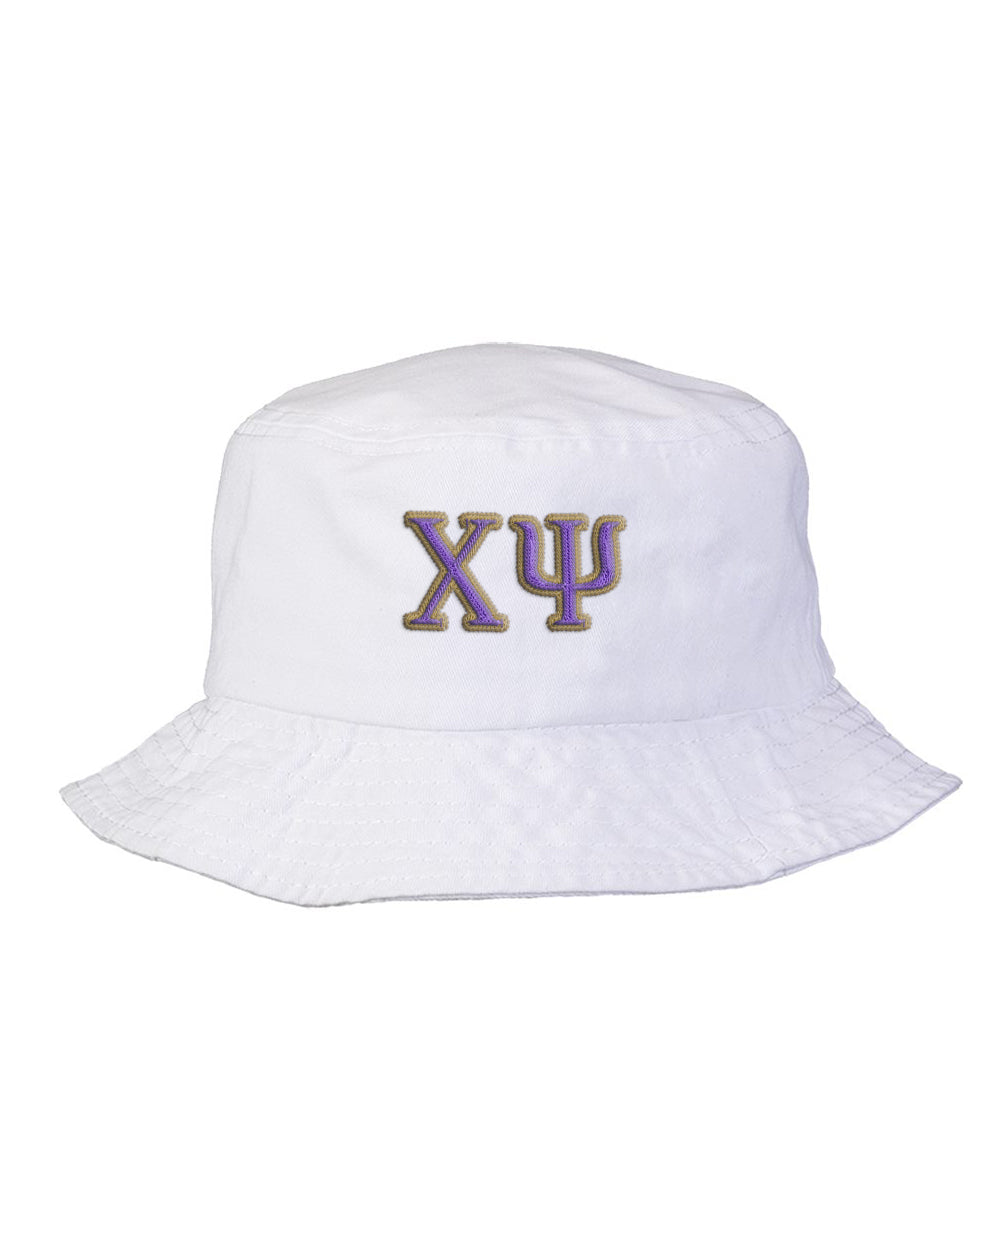 Chi Psi Embroidered Bucket Hat